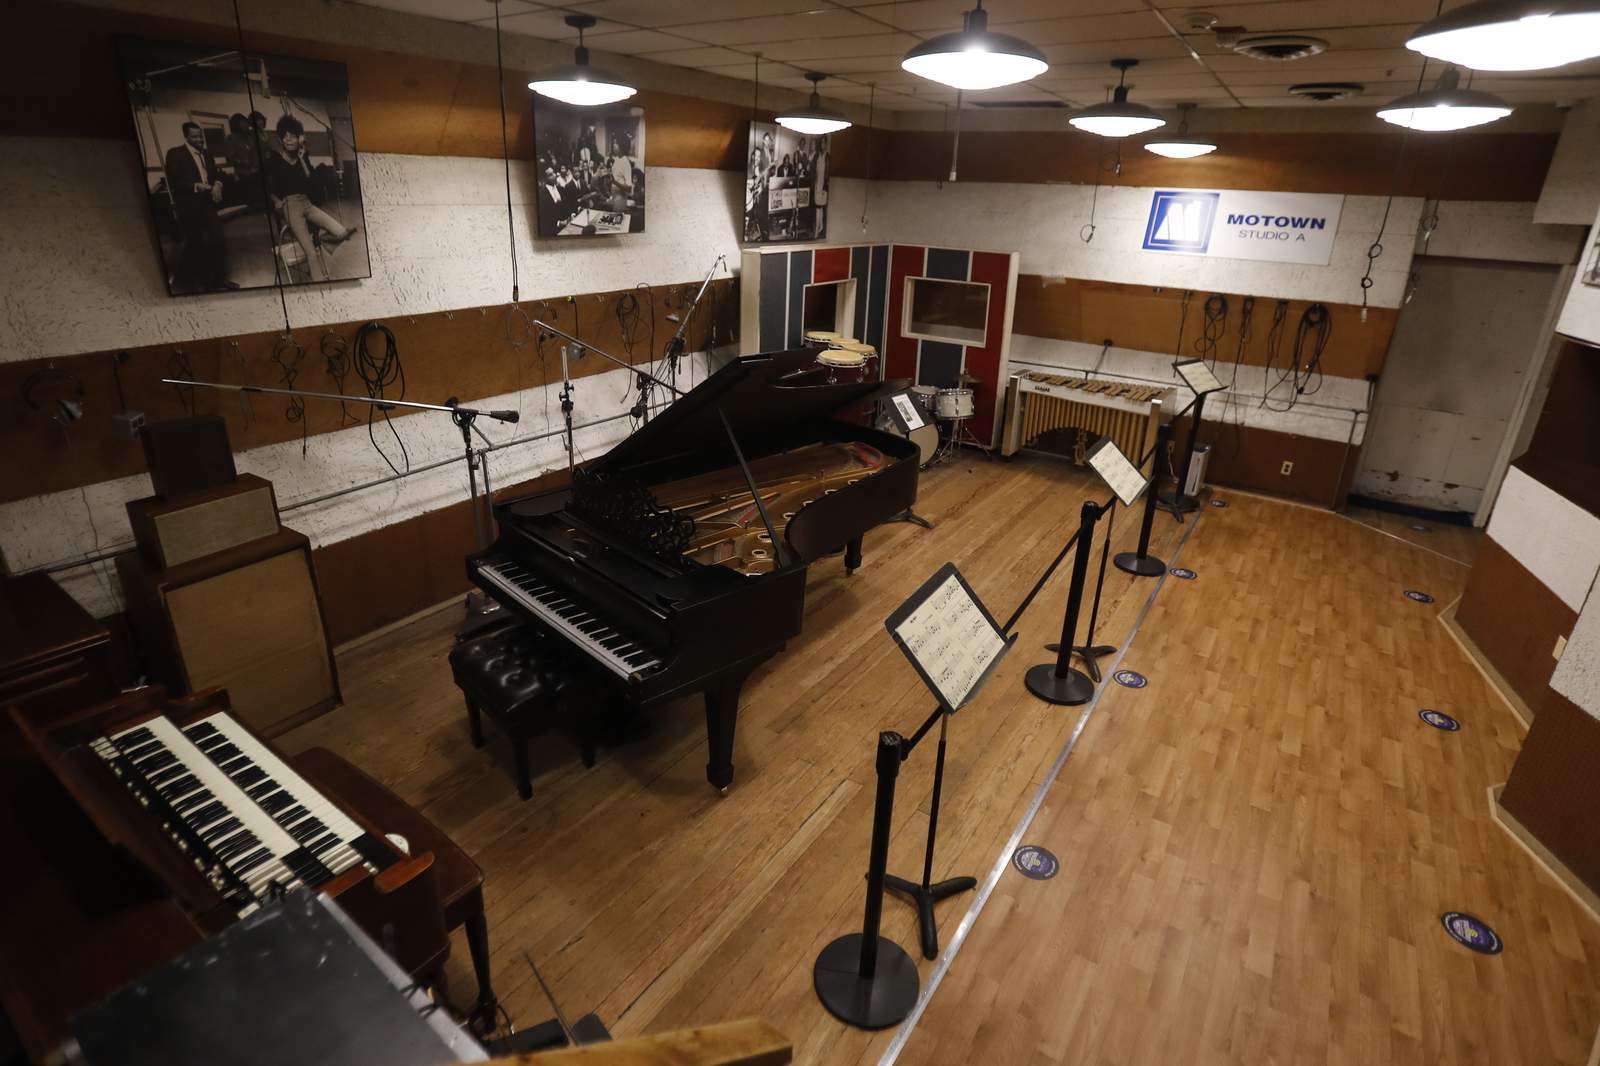 Get ready: Motown Museum reopens after 4-month closure